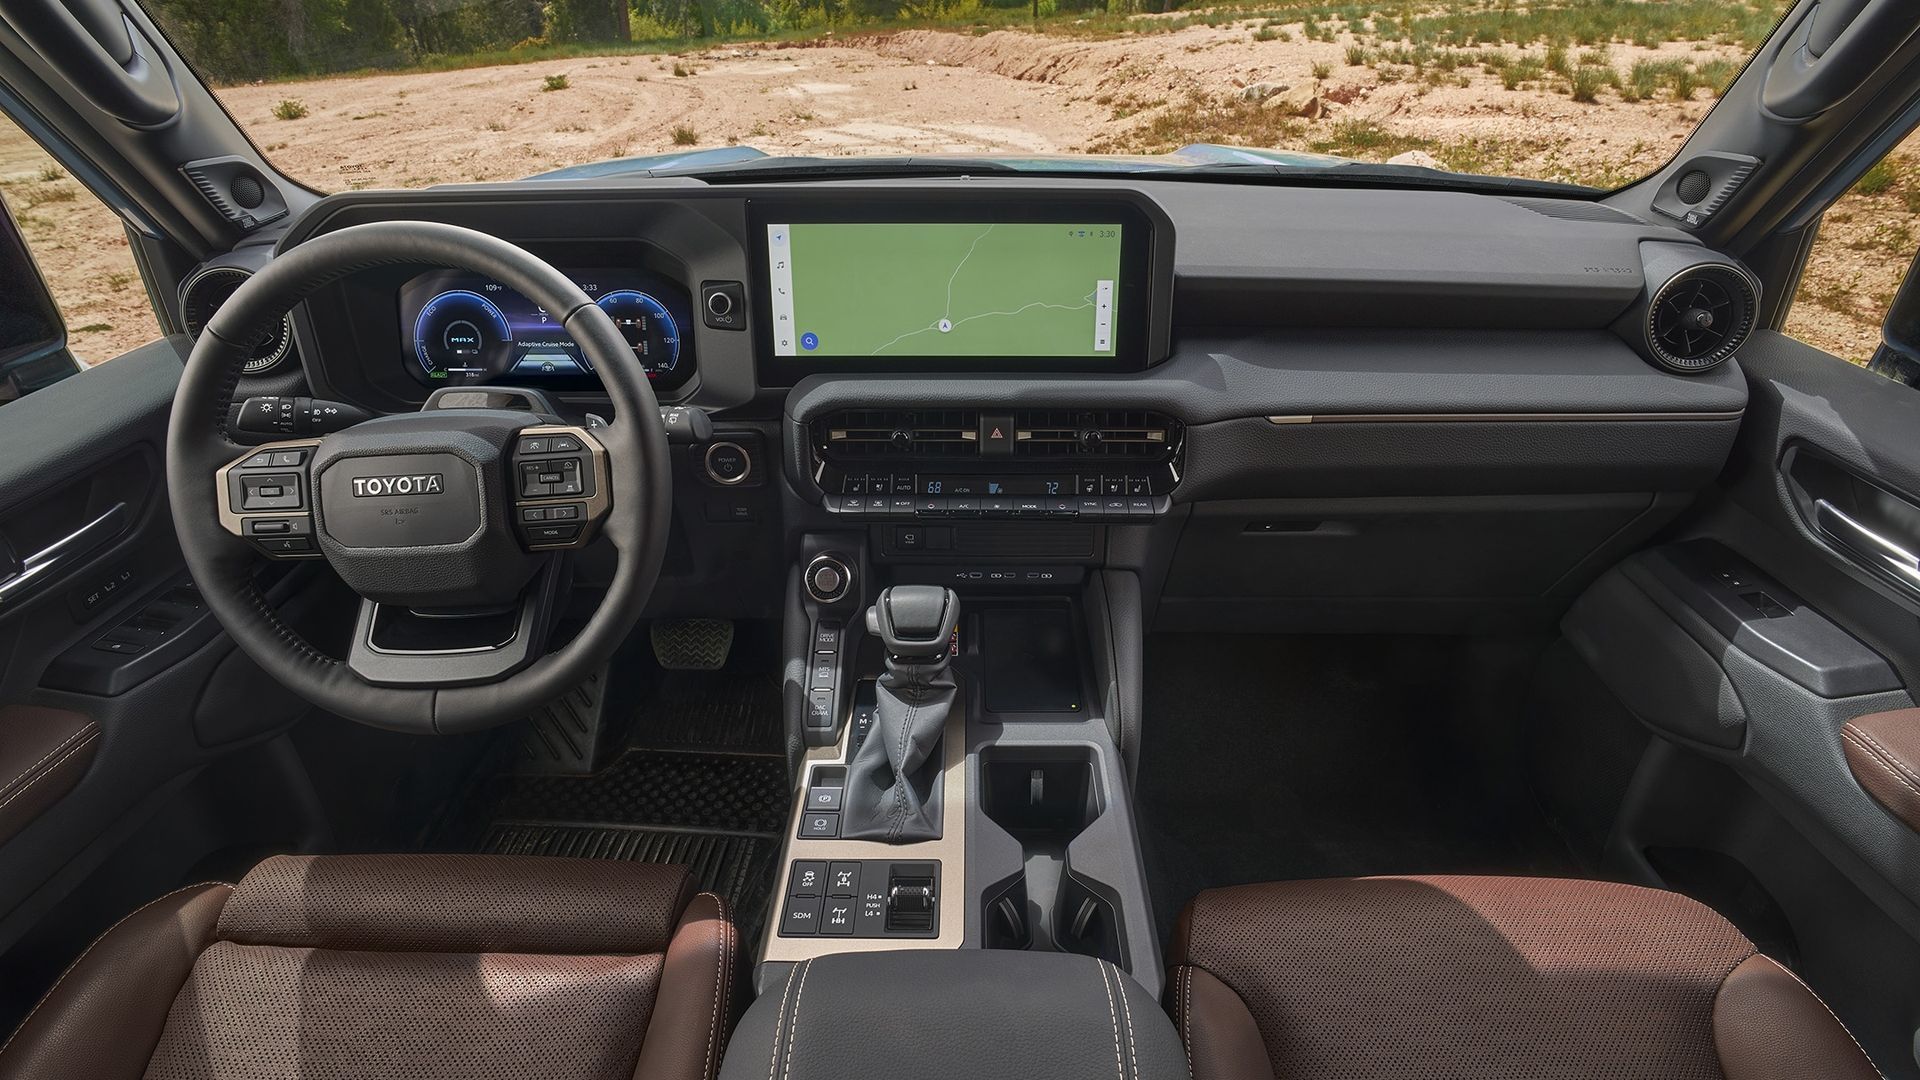 2024 Toyota Land Cruiser view into the front seats